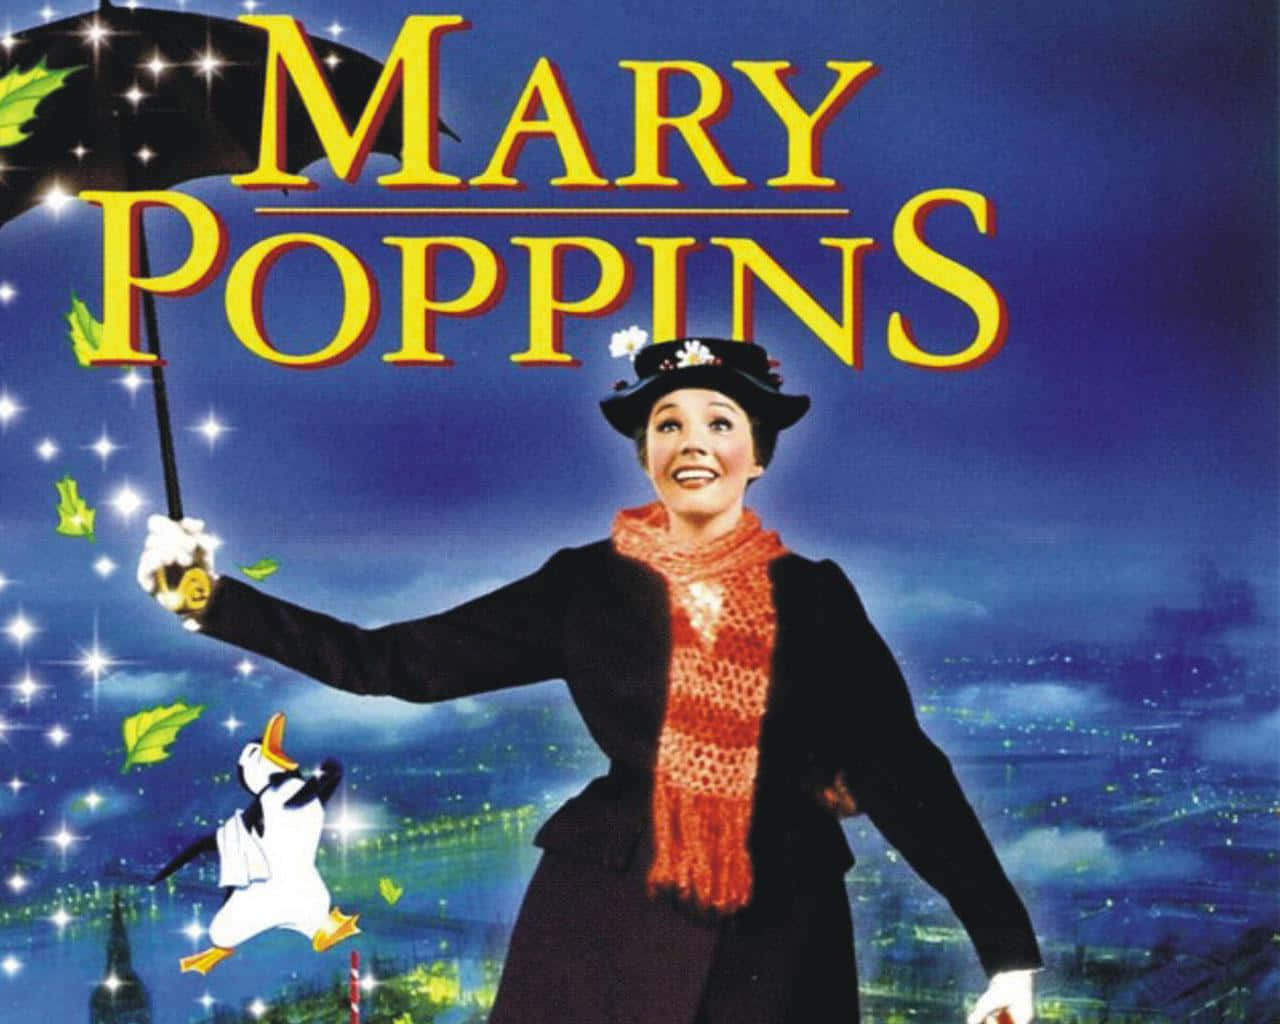 Mary Poppins Soaring High With Umbrella